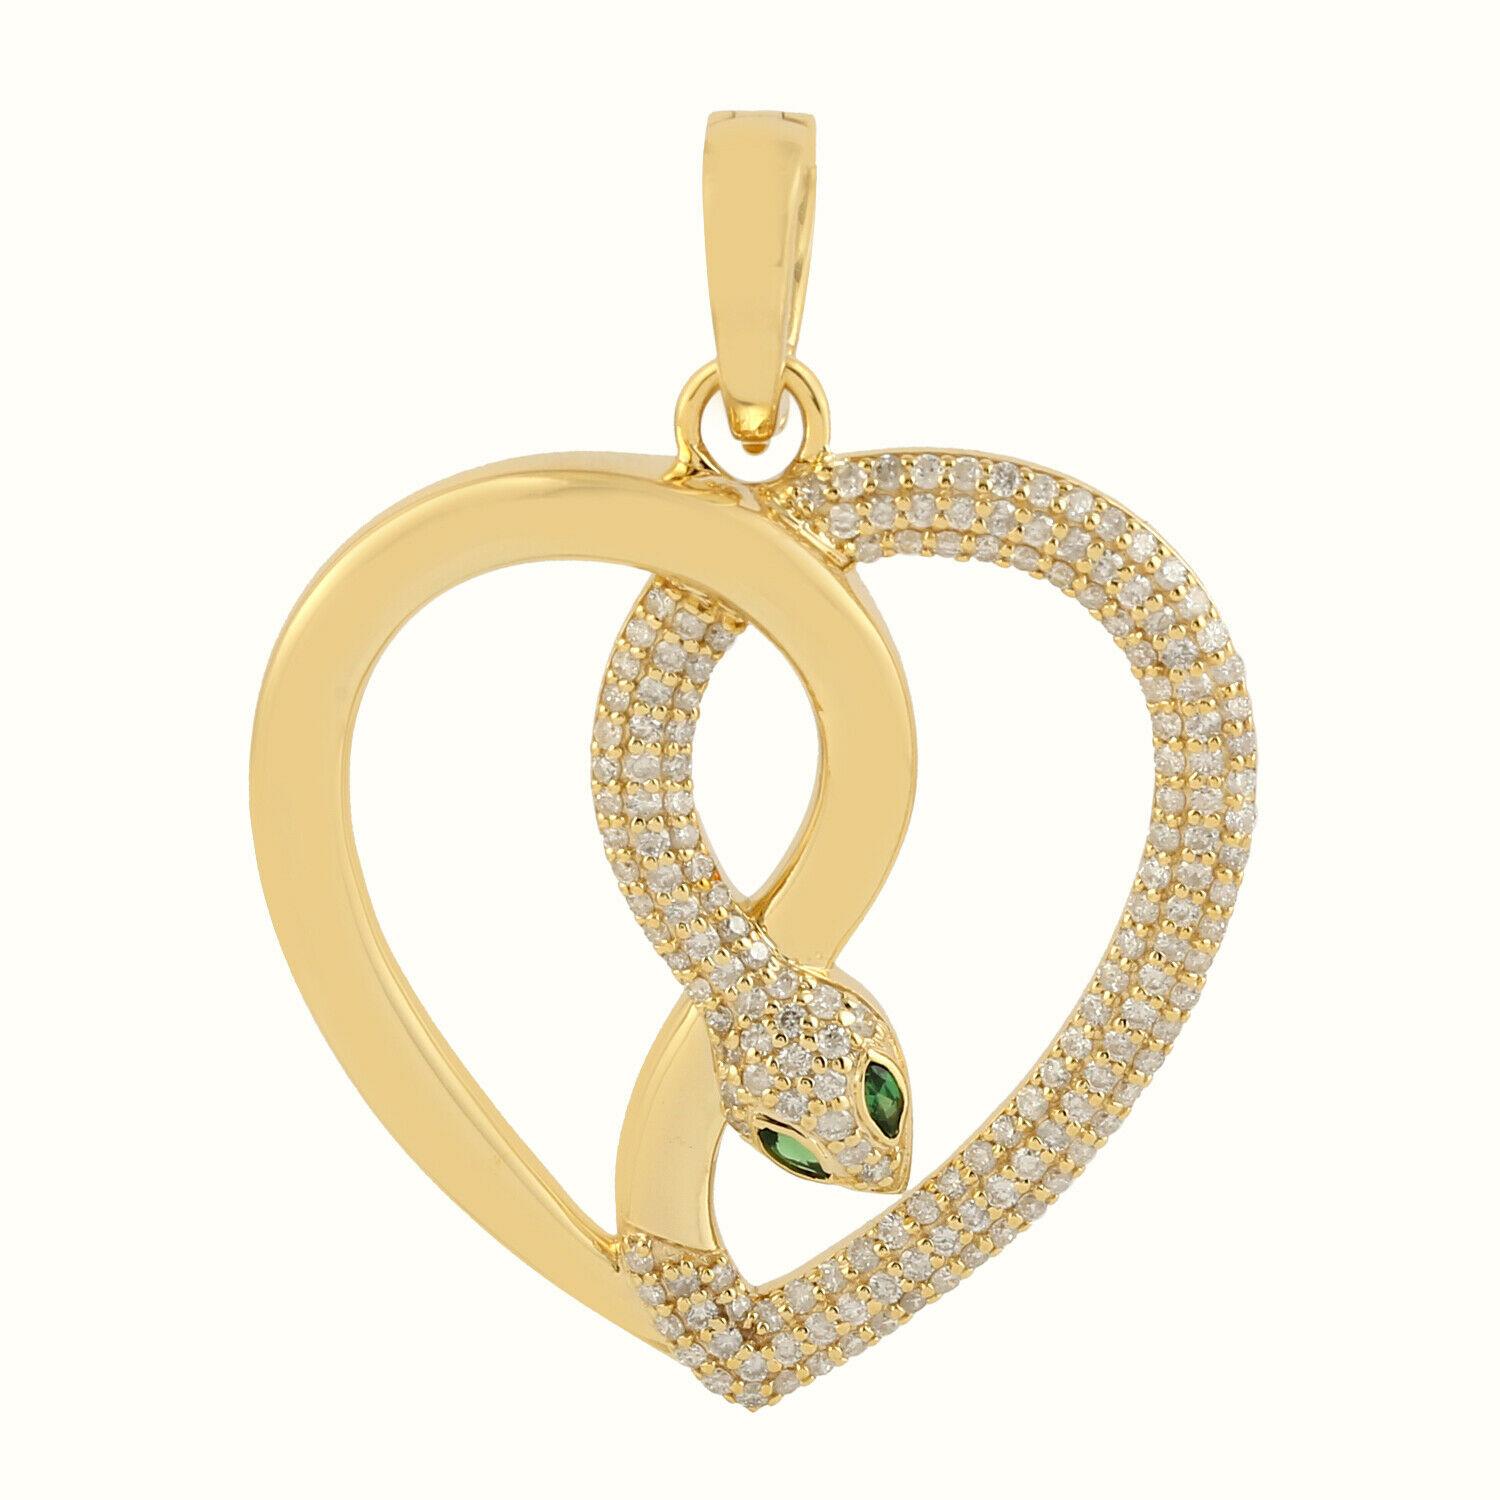 The 14 karat gold pendant is hand set with .08 carats tsavorite and .89 carats of sparkling diamonds. 

FOLLOW MEGHNA JEWELS storefront to view the latest collection & exclusive pieces. Meghna Jewels is proudly rated as a Top Seller on 1stdibs with